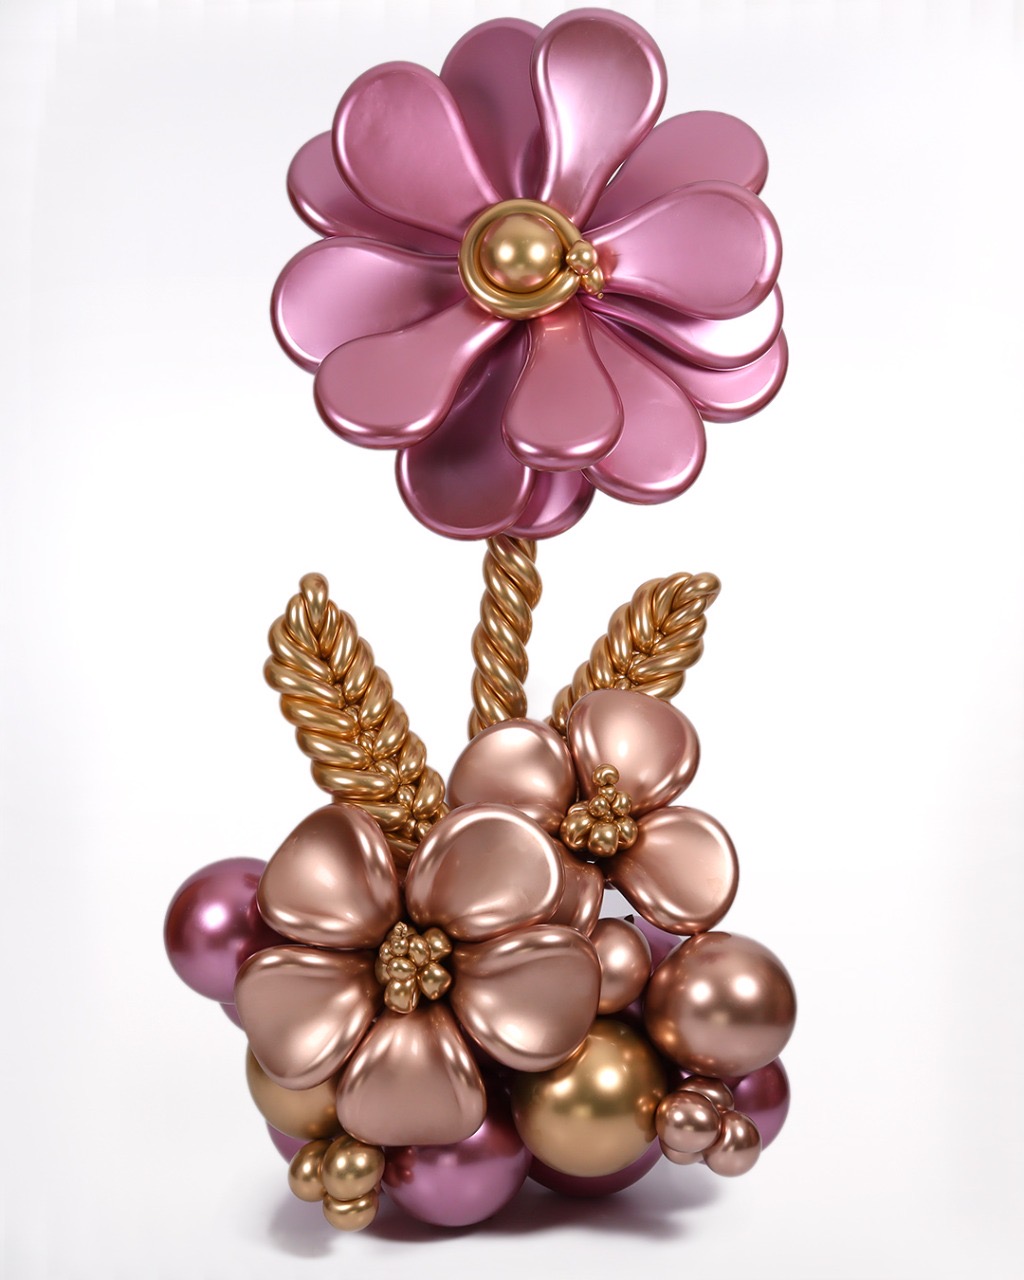 Giant Flower Balloon Stand